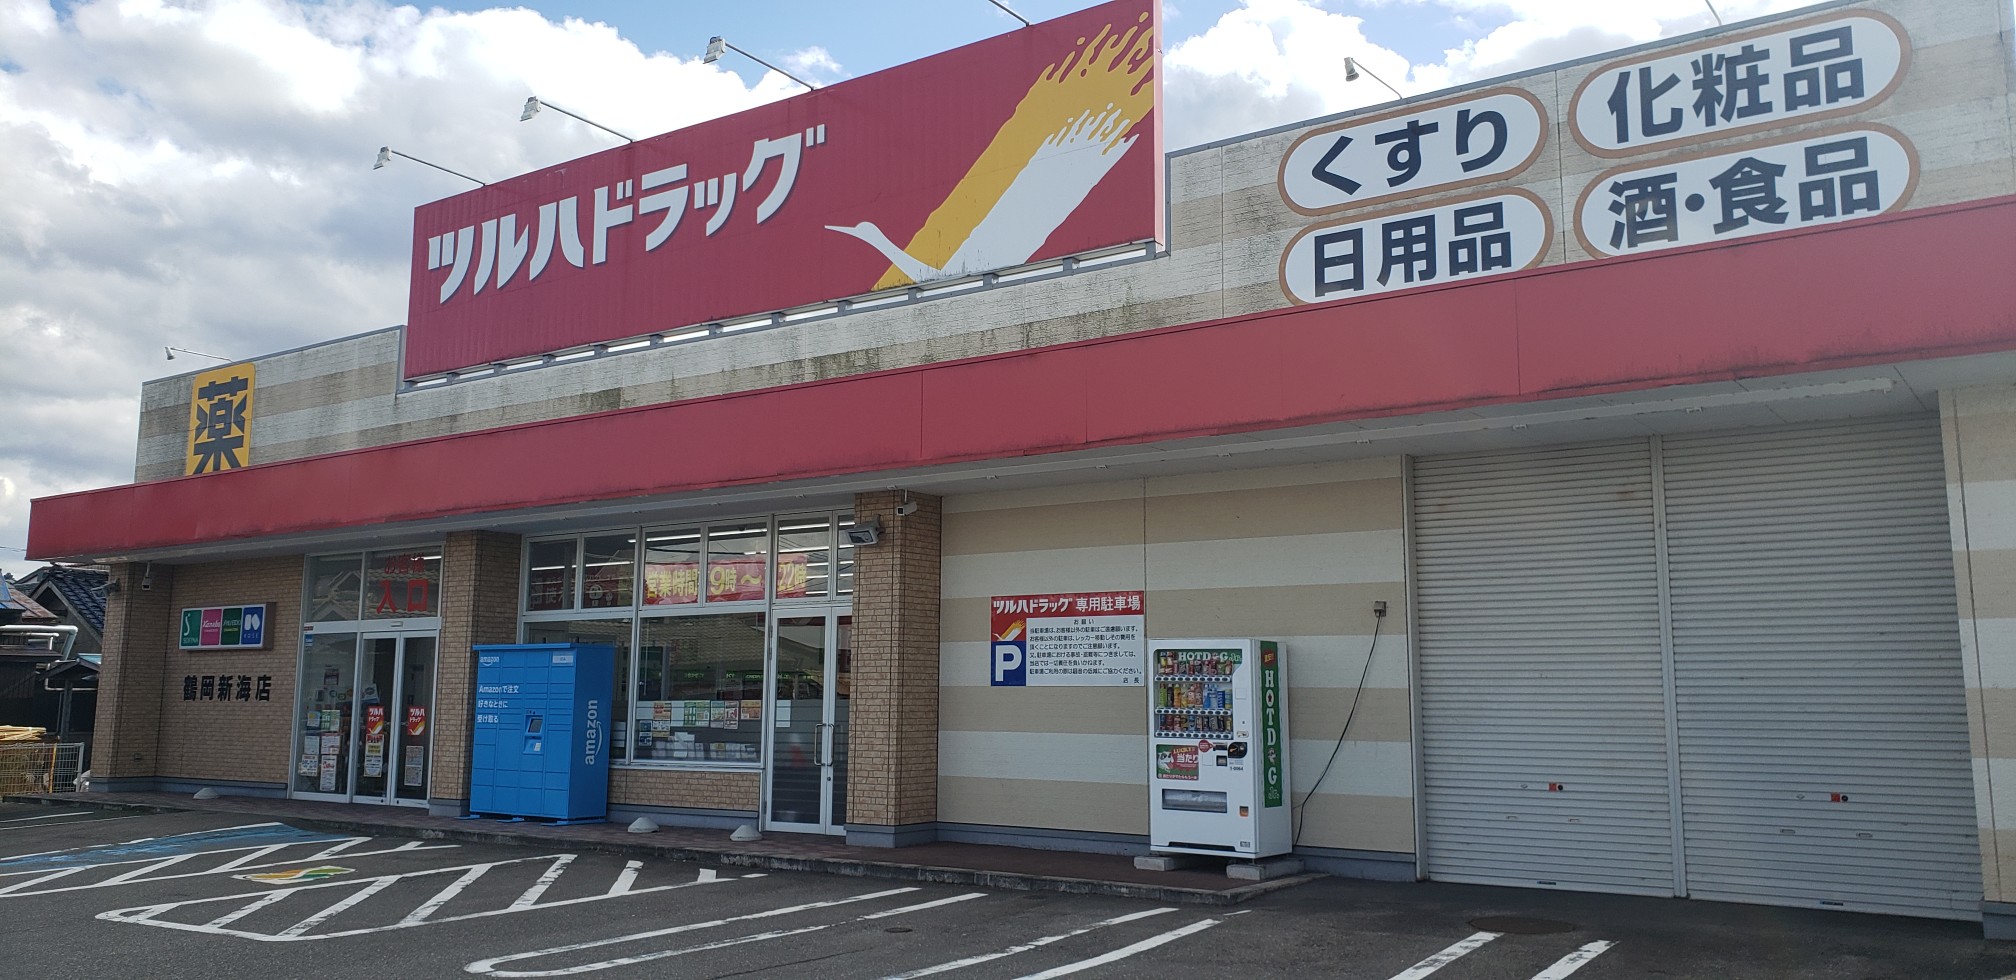 Images ツルハドラッグ 鶴岡新海店